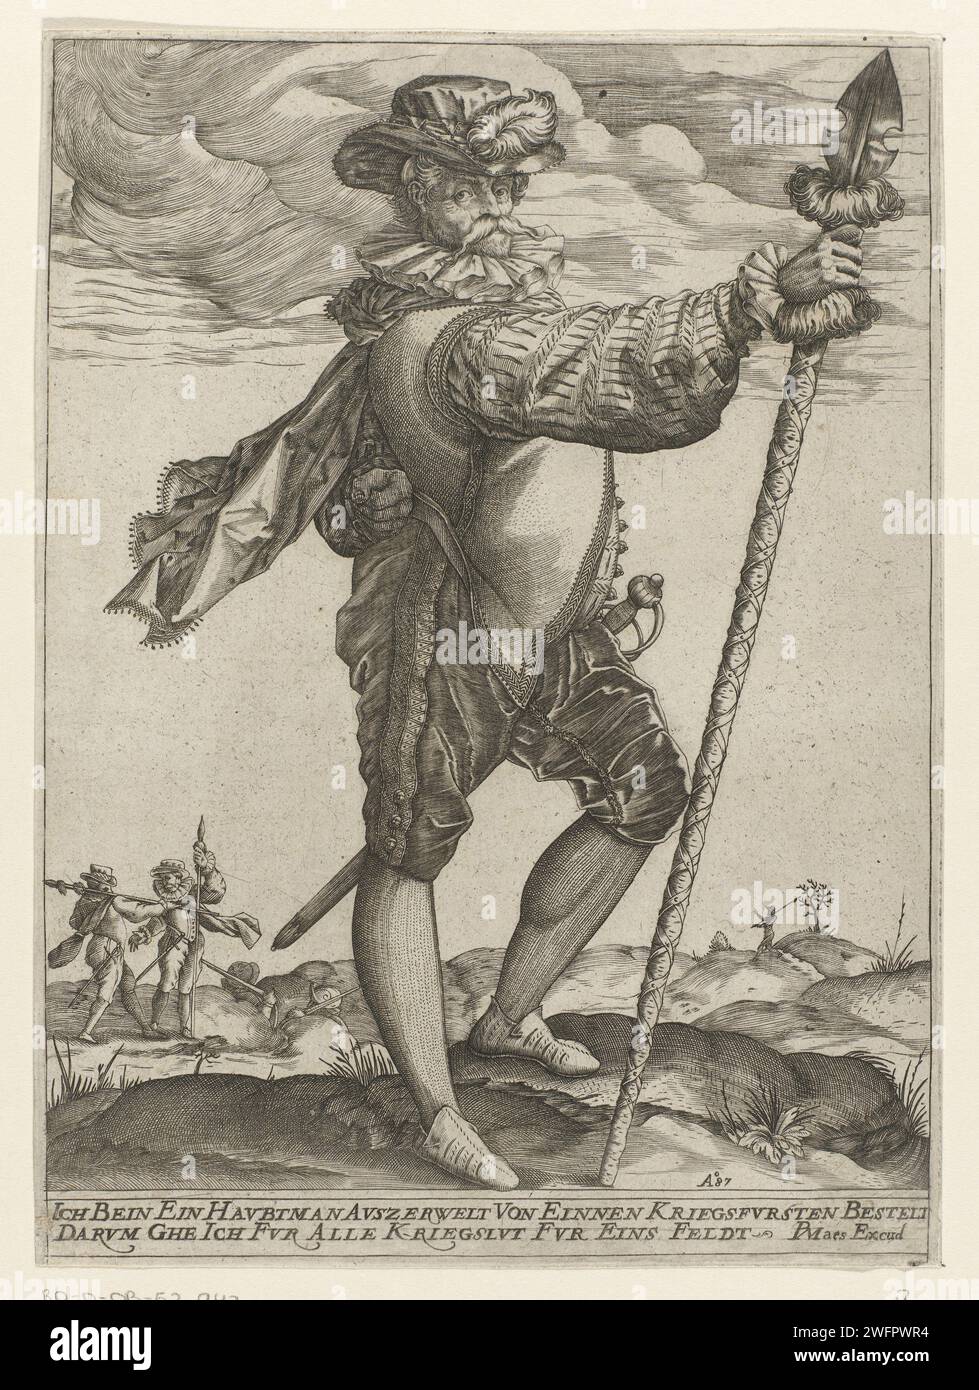 Officier met lans, Pieter Maes, after Hendrick Goltzius, 1587 print An officer with a stab weapon (partizan) in the right hand in a landscape. In the background infantry groups. Under the show two lines of text in German. Cologne paper engraving helved weapons, polearms (for striking, hacking, thrusting): lance Stock Photo